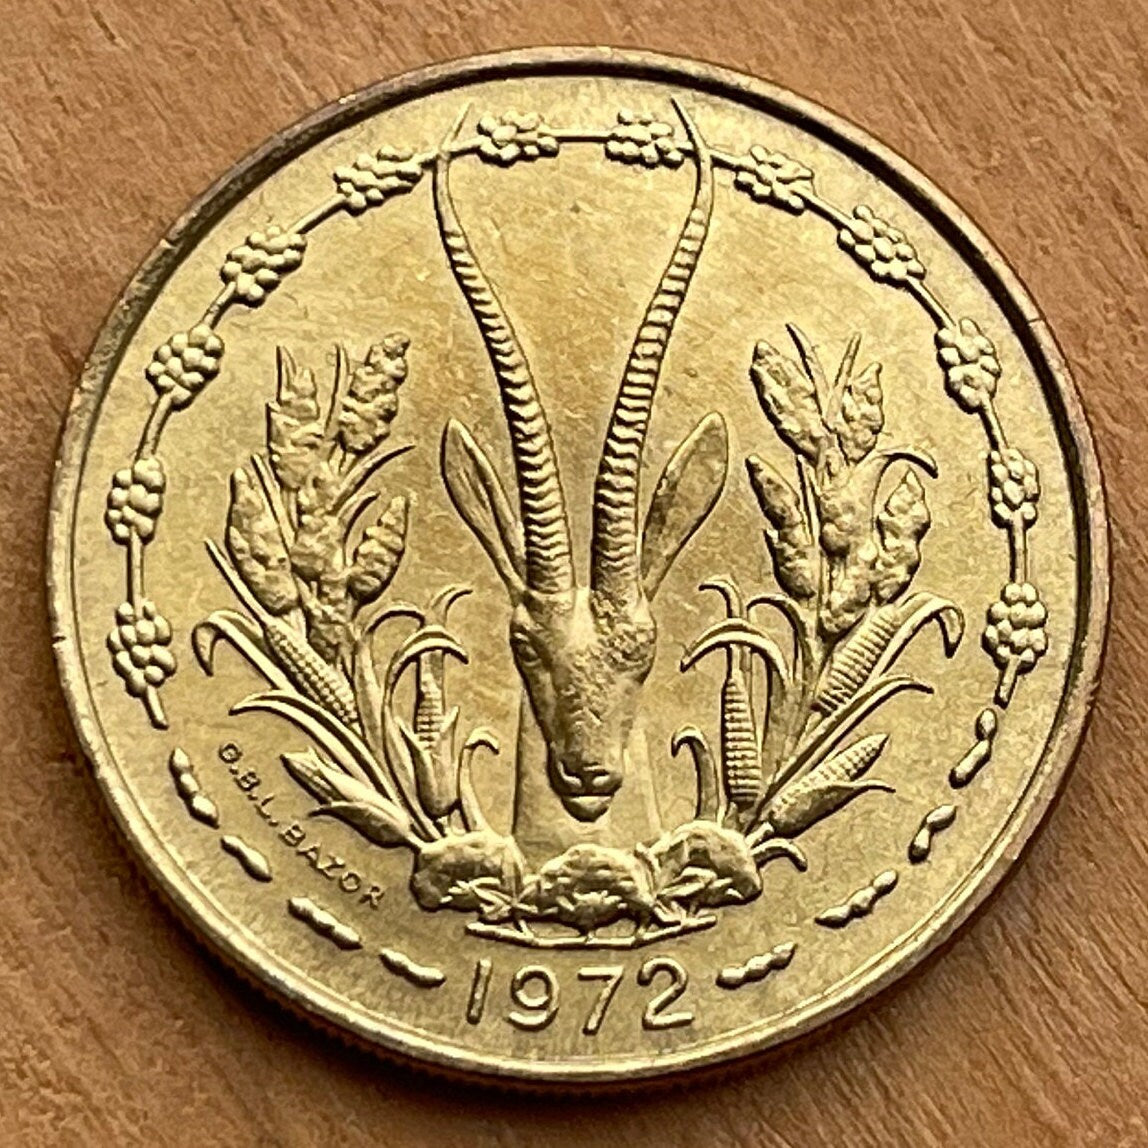 Dama Gazelle 25 CFA Francs & Akan Sawfish Goldweight West African States Authentic Coin Money for Jewelry and Crafts (Ashanti) Mhorr gazelle